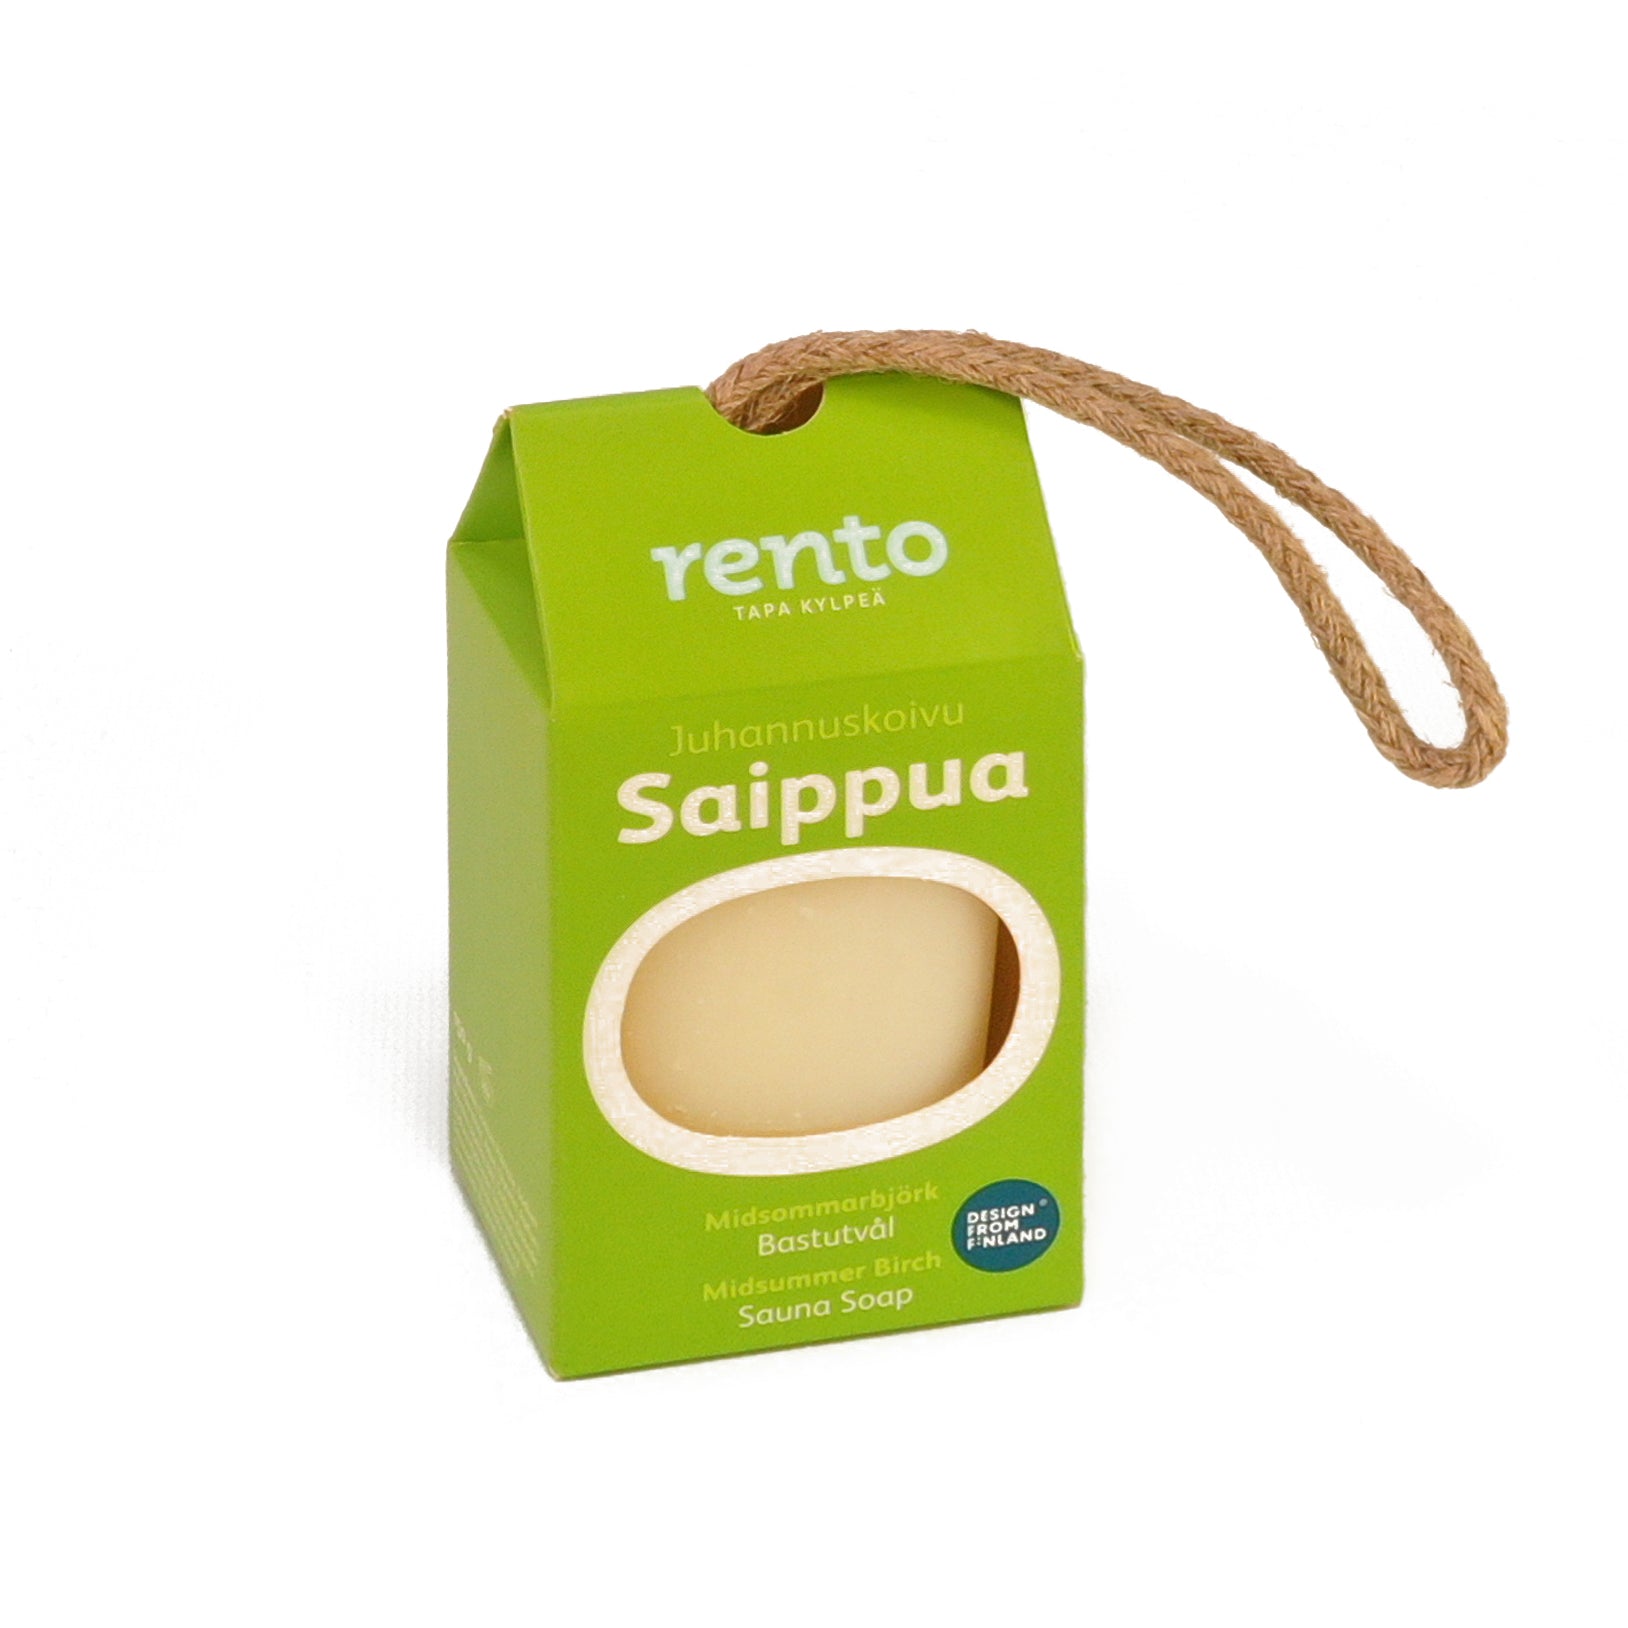 Green box containing a white bar of soap with a brown string on white background